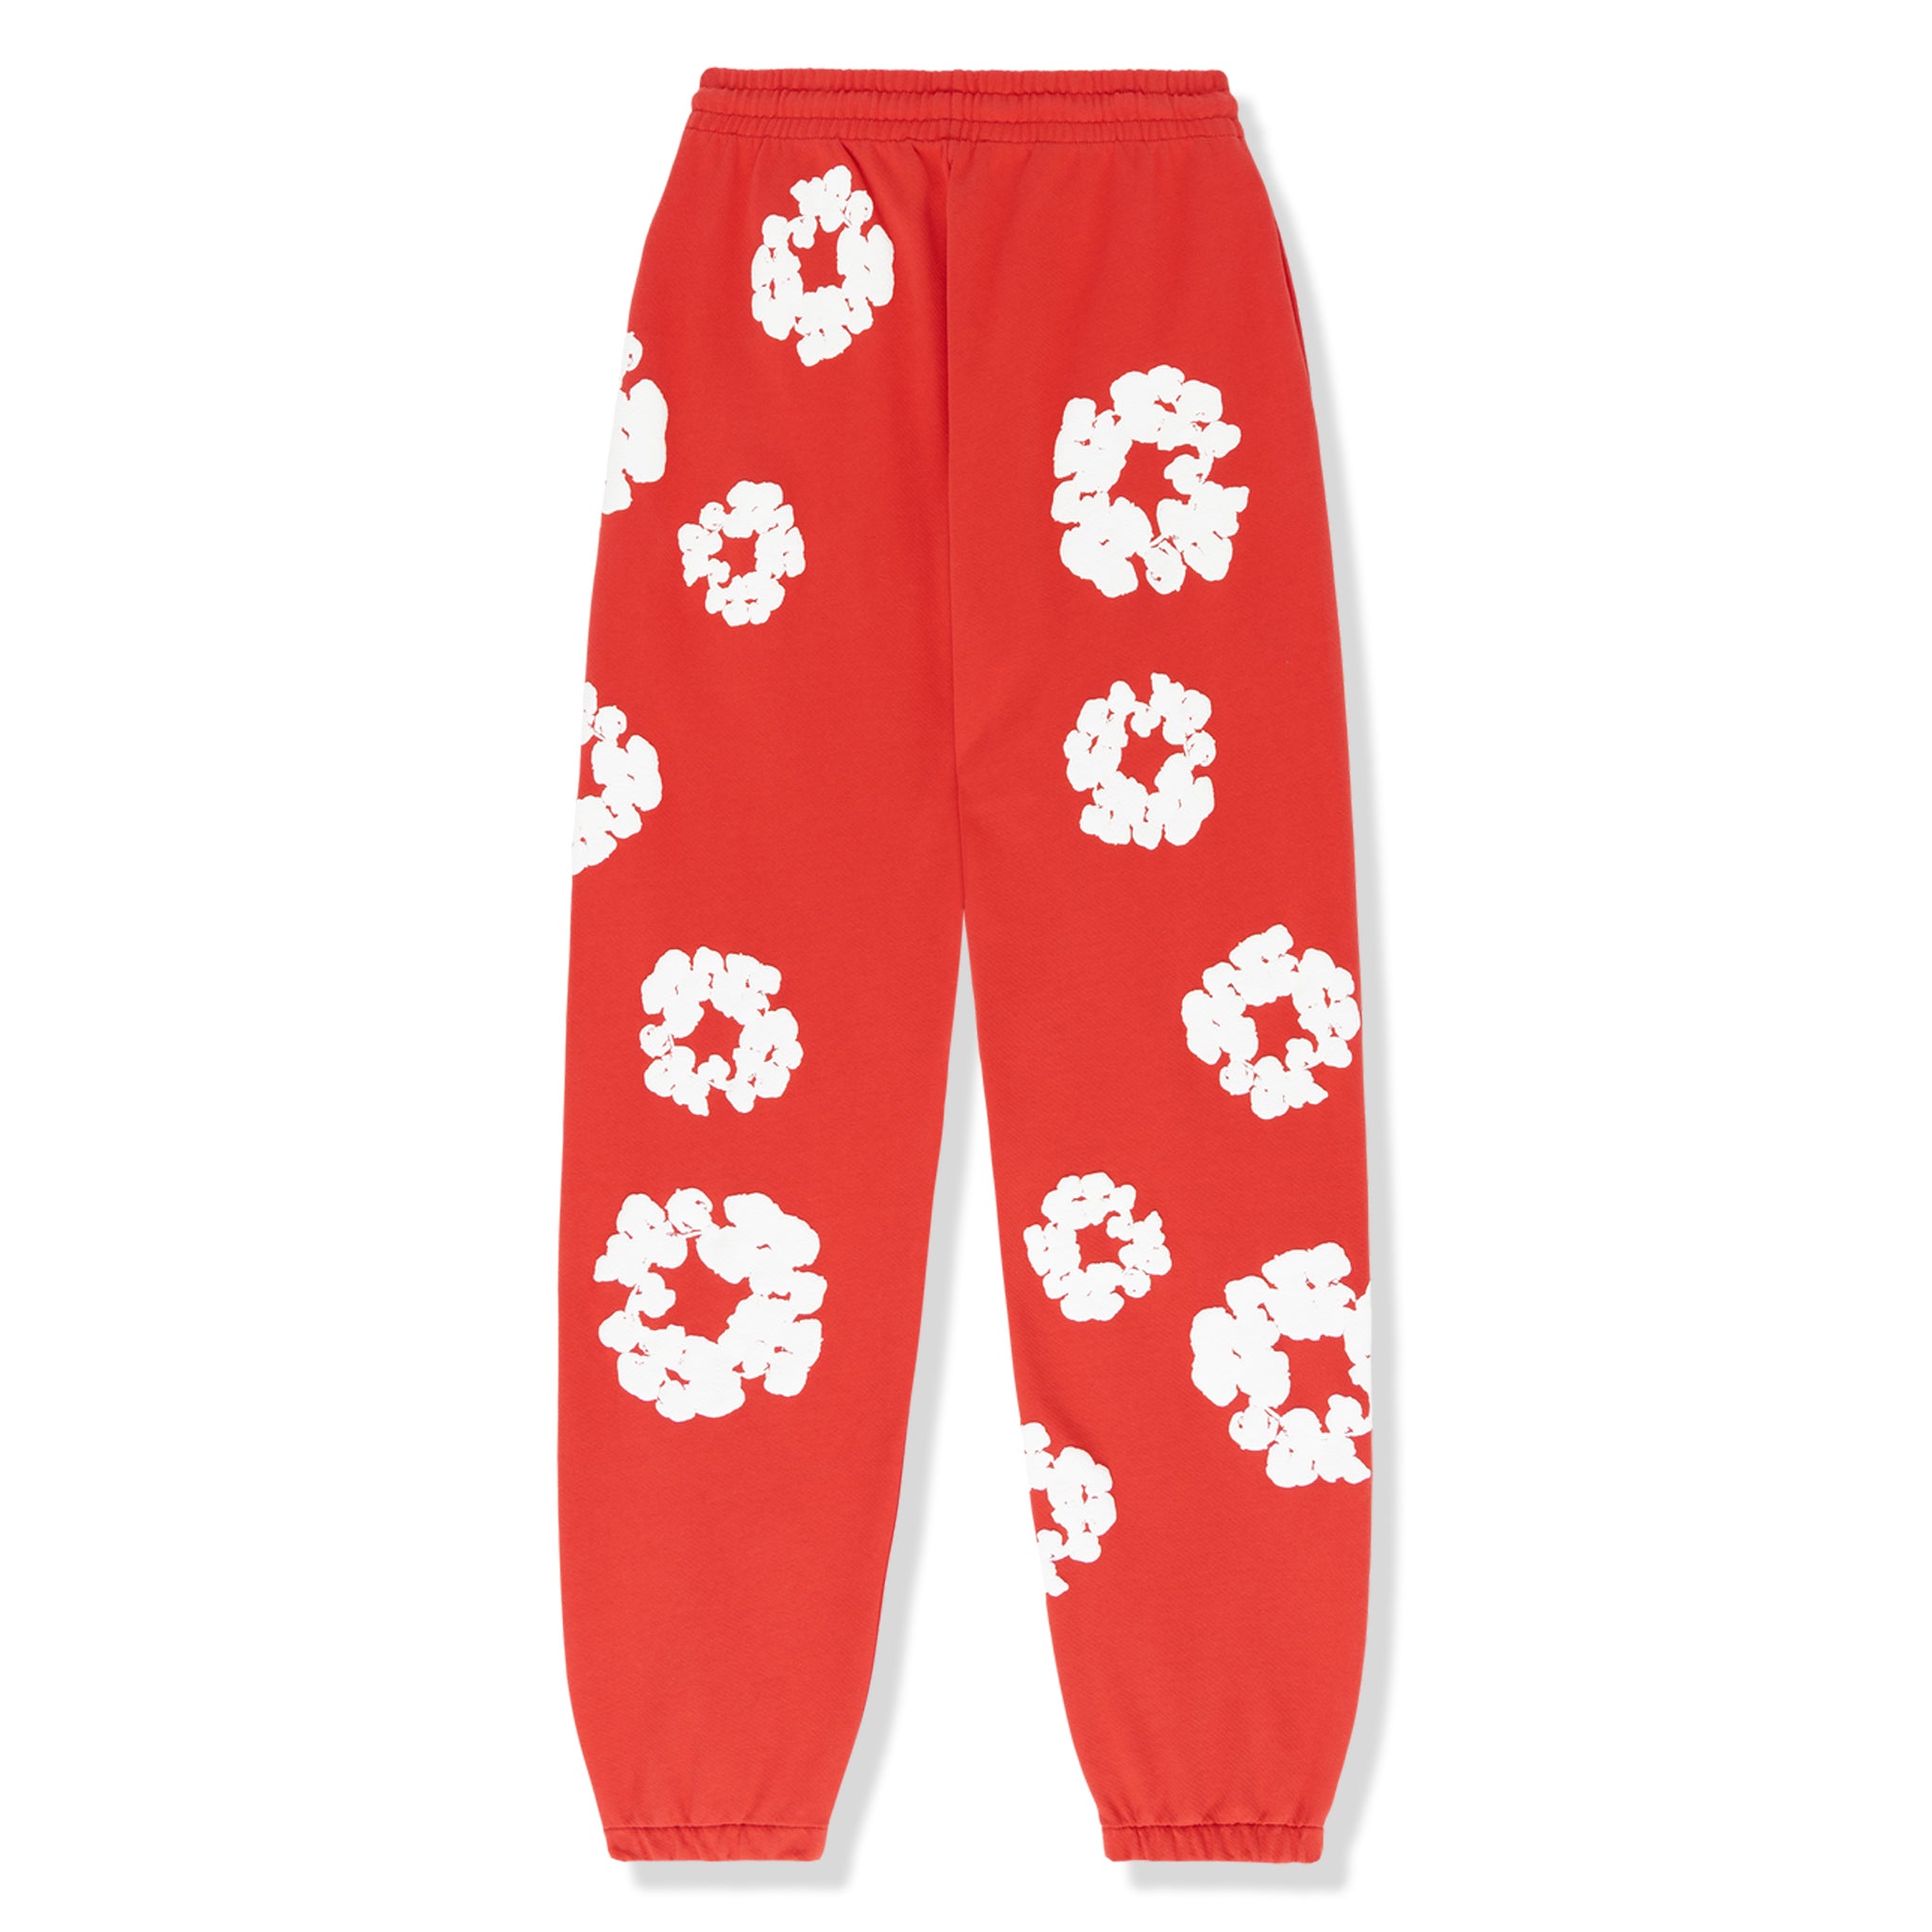 Back view of Denim Tears The Cotton Wreath Red Sweatpants